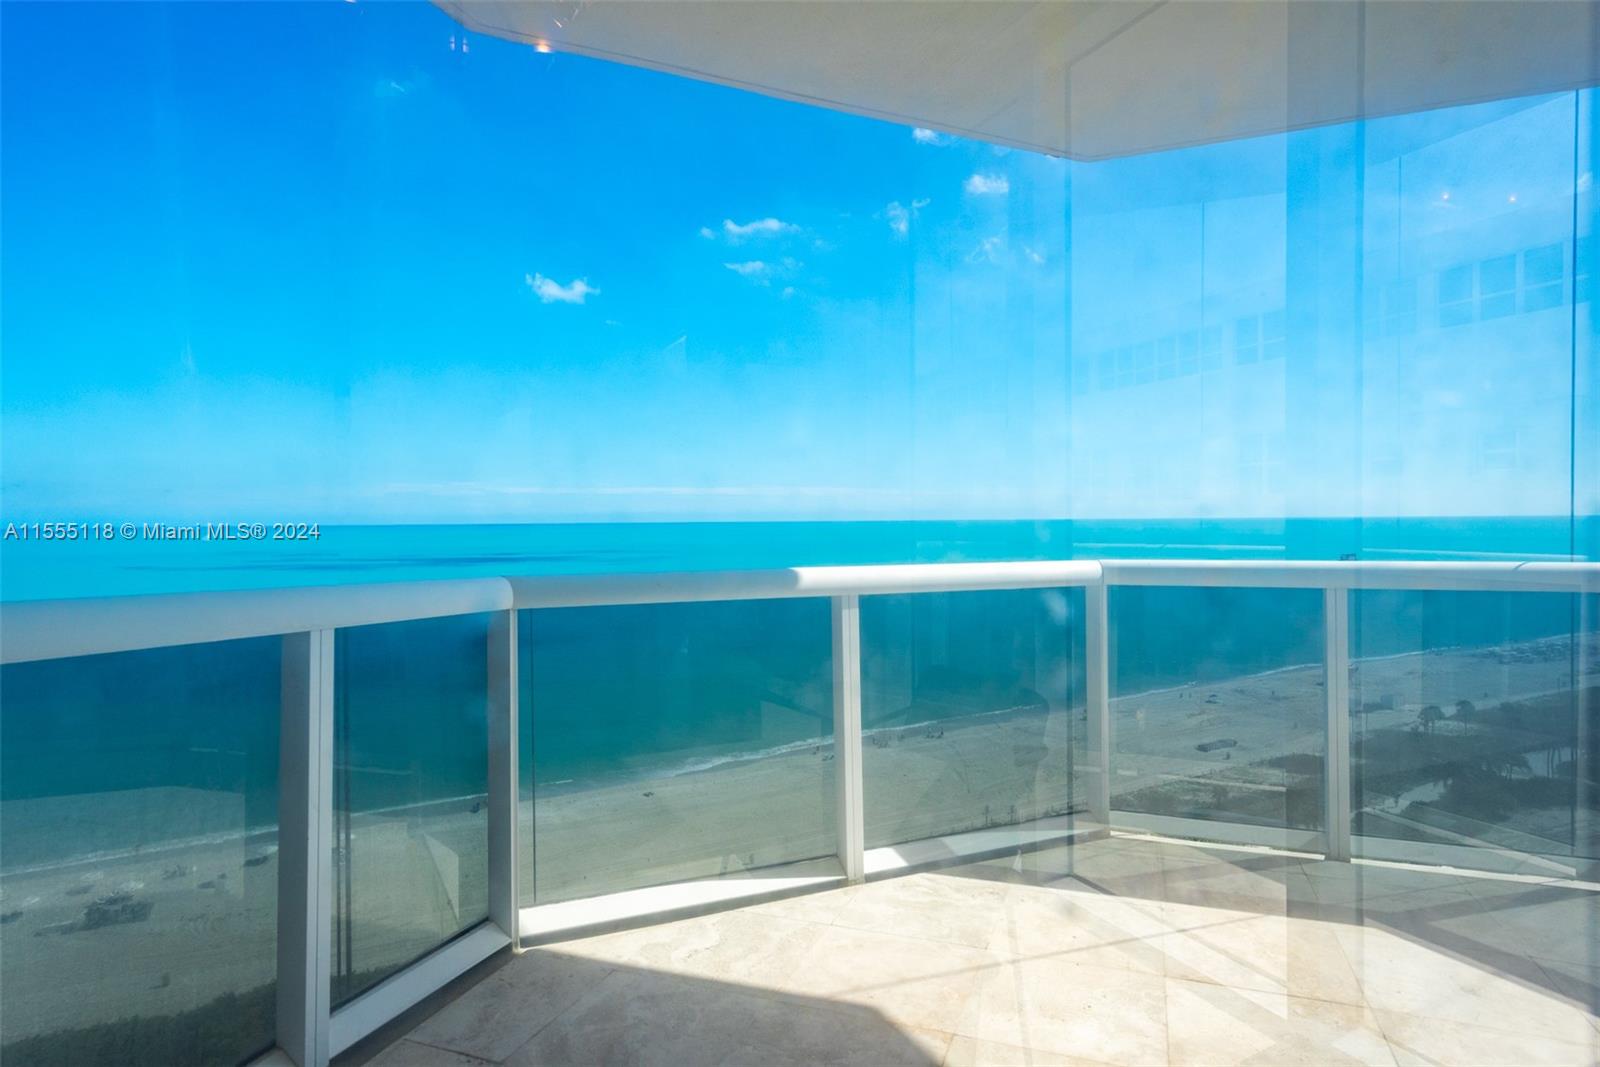 Introducing your ocean-view sanctuary in vibrant Miami Beach! This elegant three-bedroom, three-bath corner unit features marble floors, floor-to-ceiling windows, and two balconies for soaking in the ocean views. The open kitchen flows seamlessly into the spacious living and dining area, perfect for entertaining. Relax in the main suite's luxurious bathroom with jacuzzi and separate shower, walk-in closet. Enjoy exceptional building amenities, elevating your lifestyle in this prime location. Don't miss out—schedule your viewing today! Also available for sale .